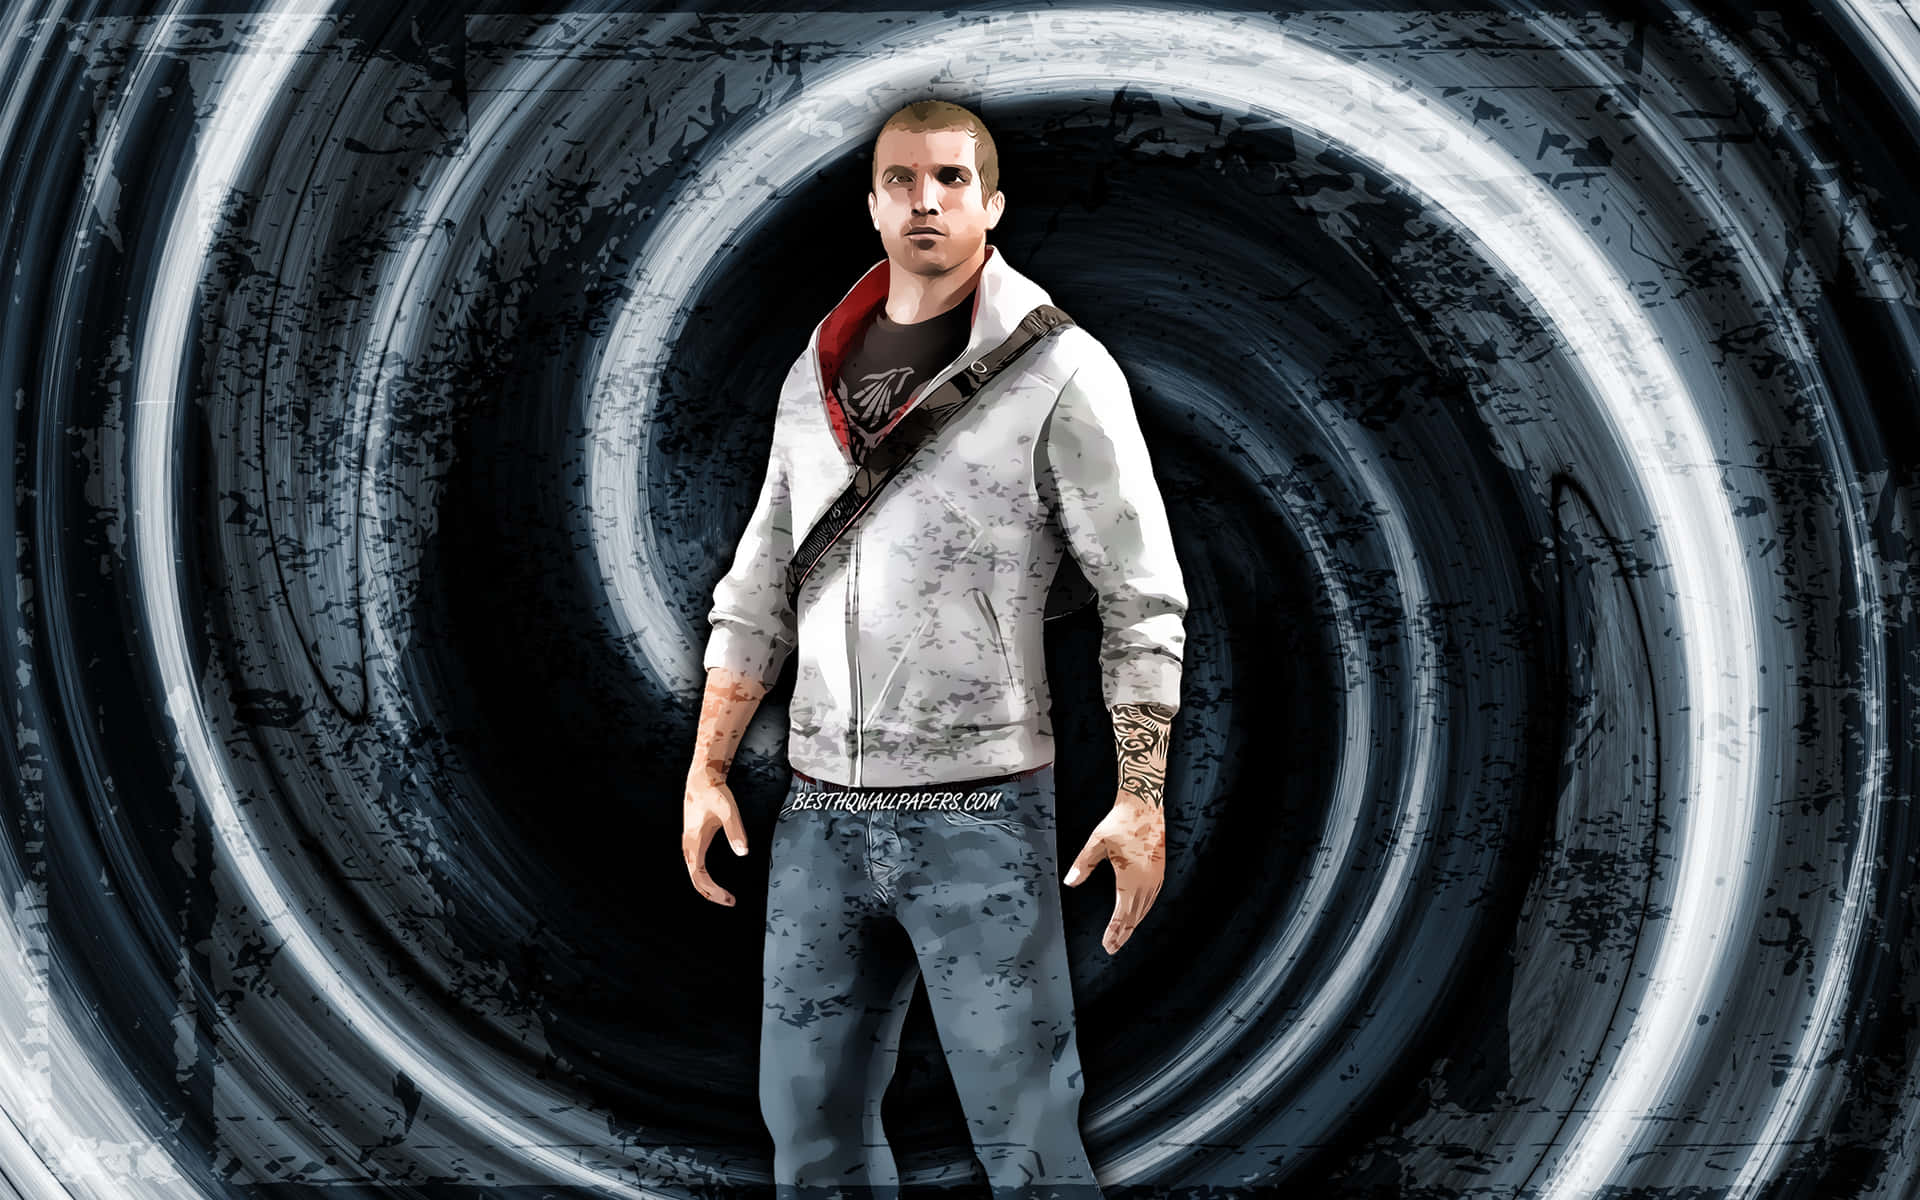 Desmond Miles in action - Assassin's Creed protagonist Wallpaper